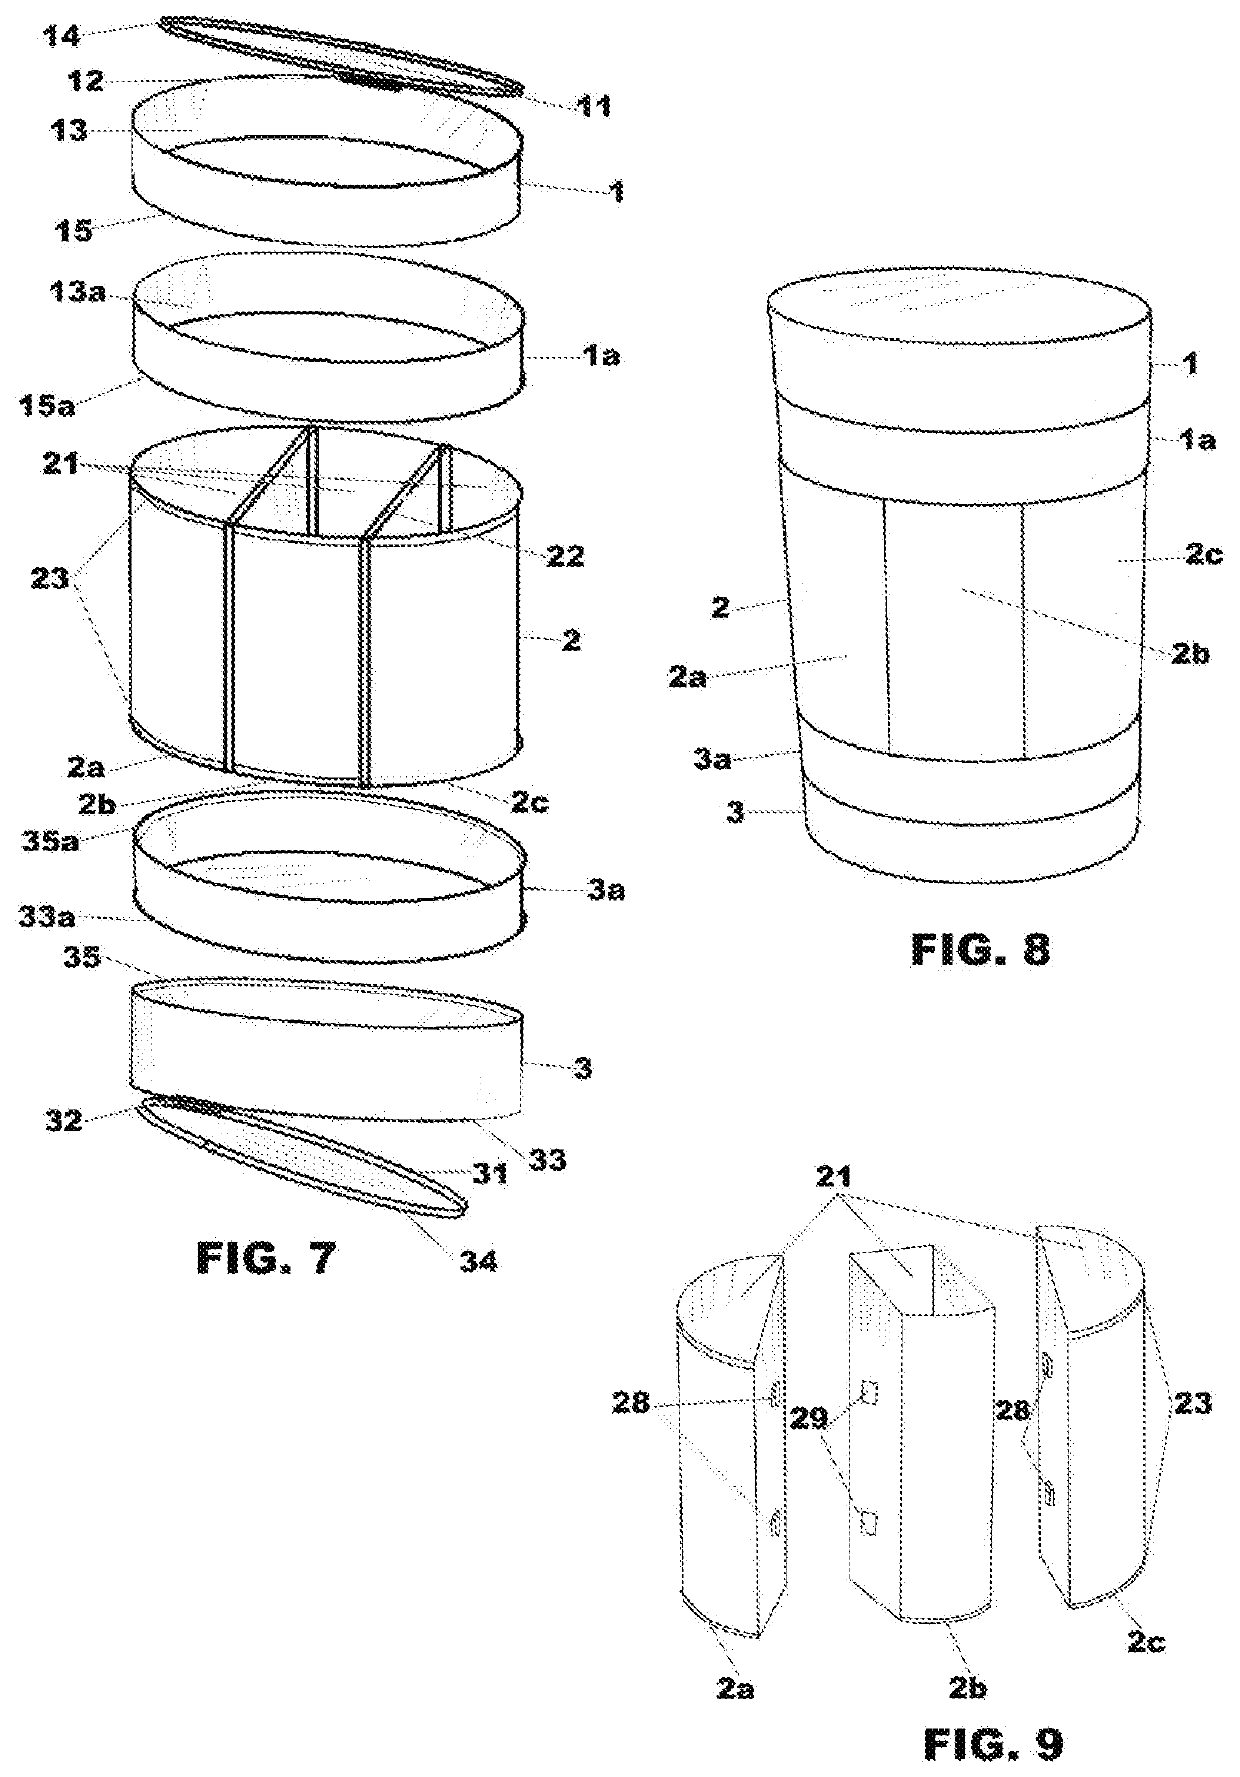 Multi-layer multi-compartment cosmetic and personal items container for holding both flat and tall items